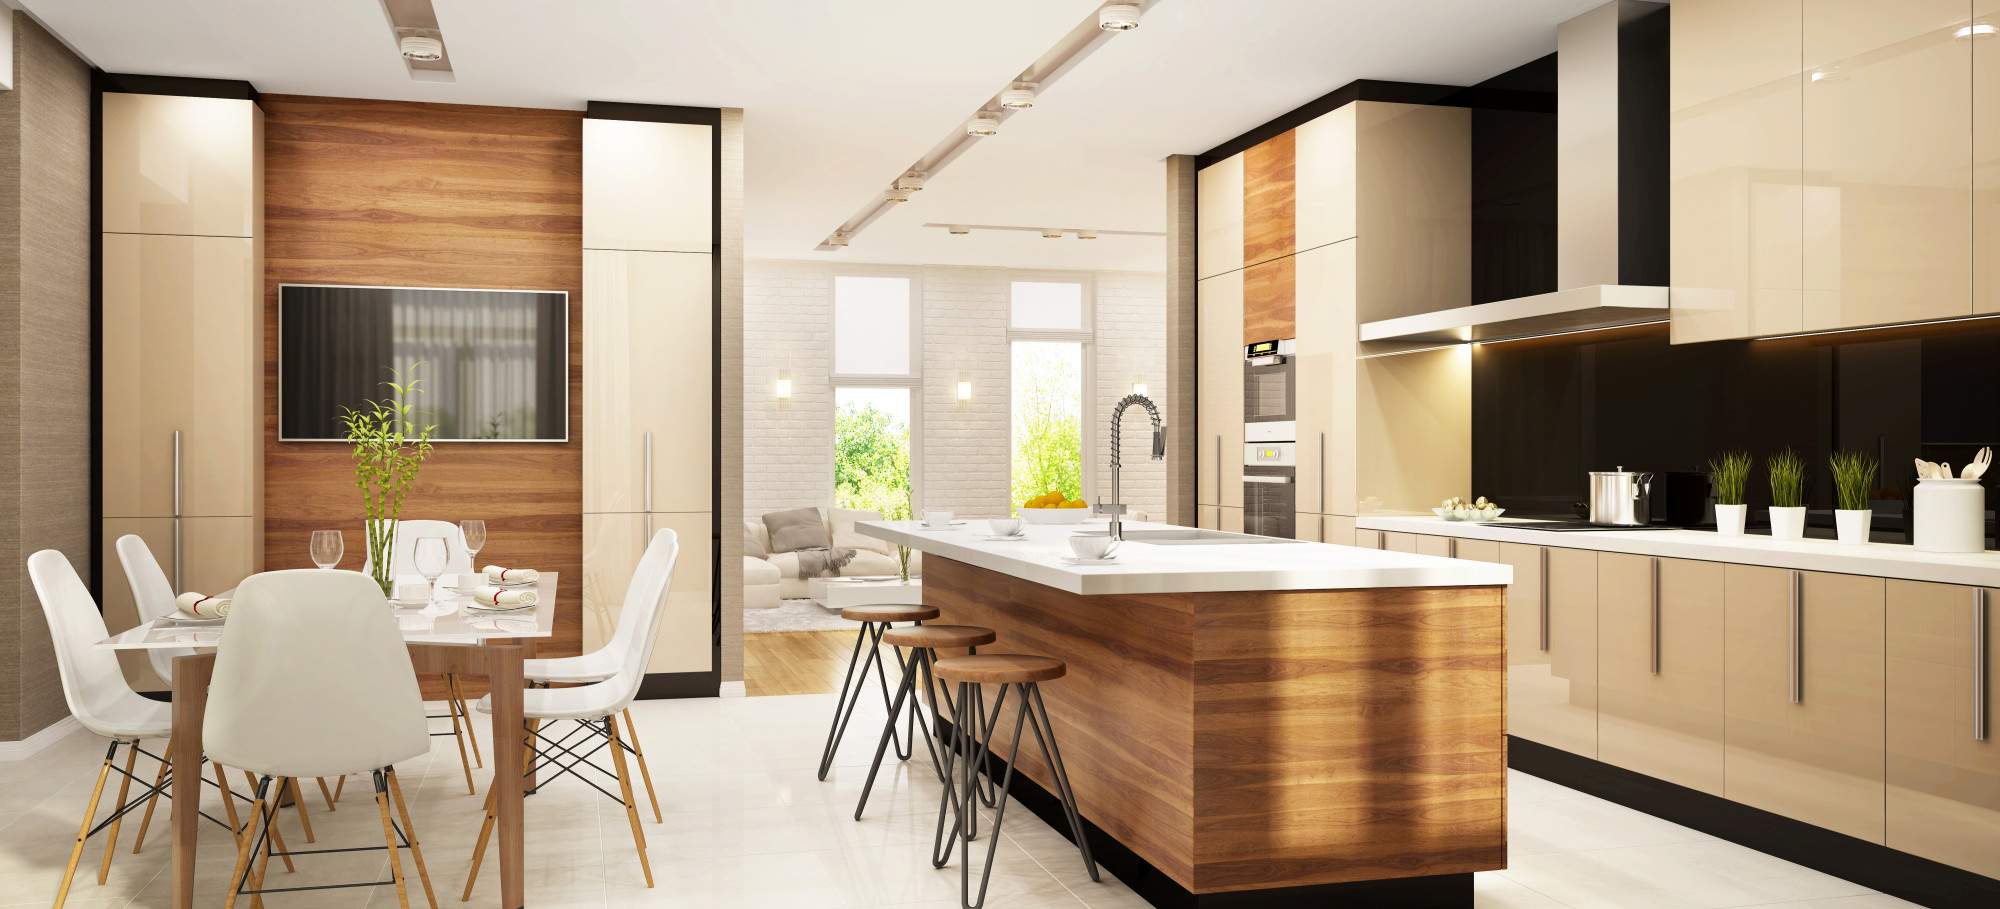 Kitchen Design Trends You’ll Love